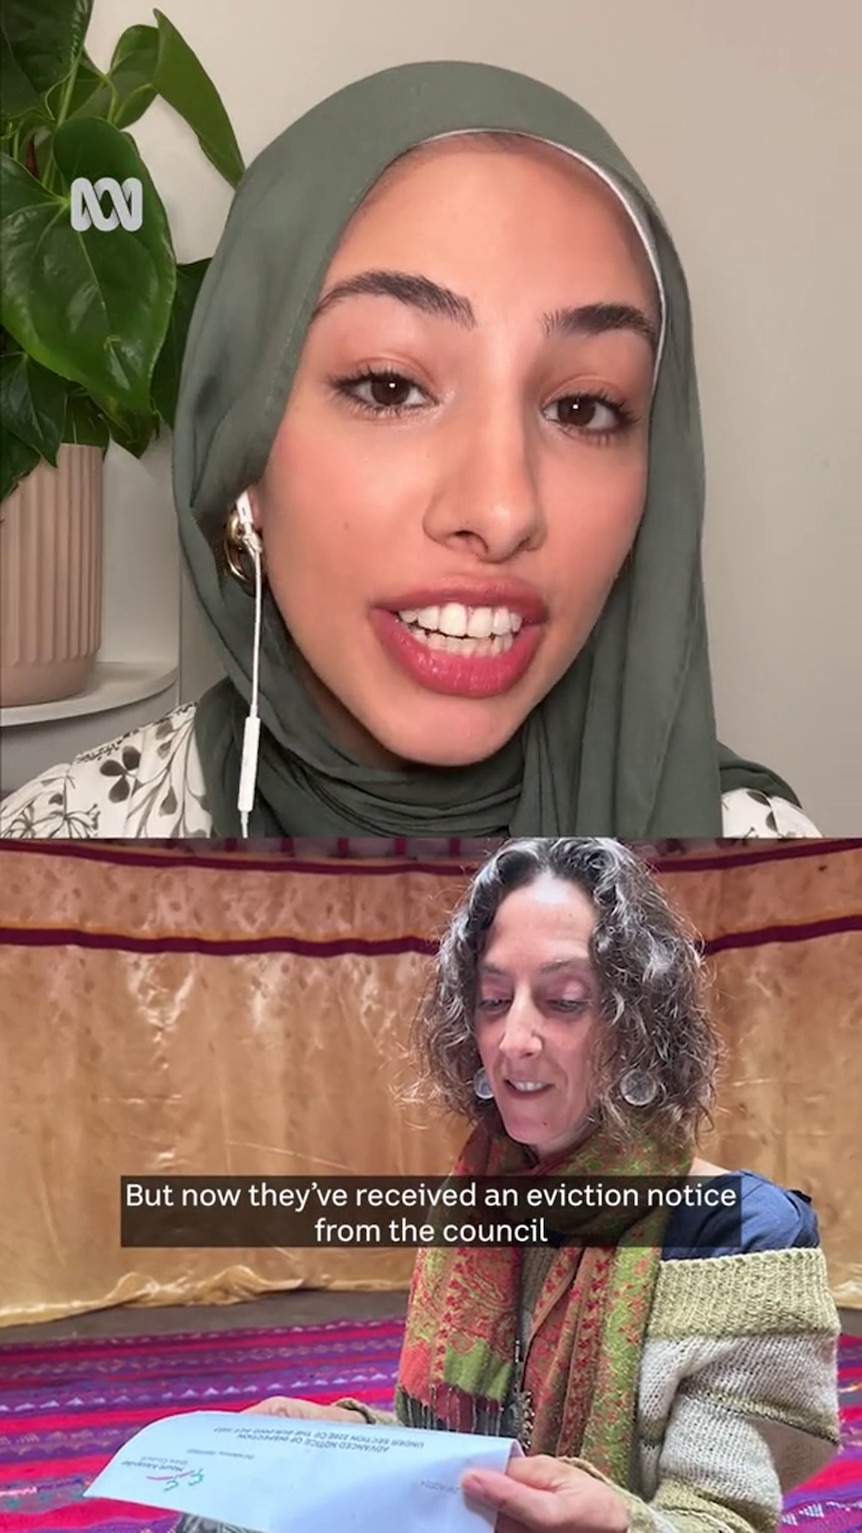 Composite of young Arab woman in hijab and a white woman with grey, curly hair reading letter